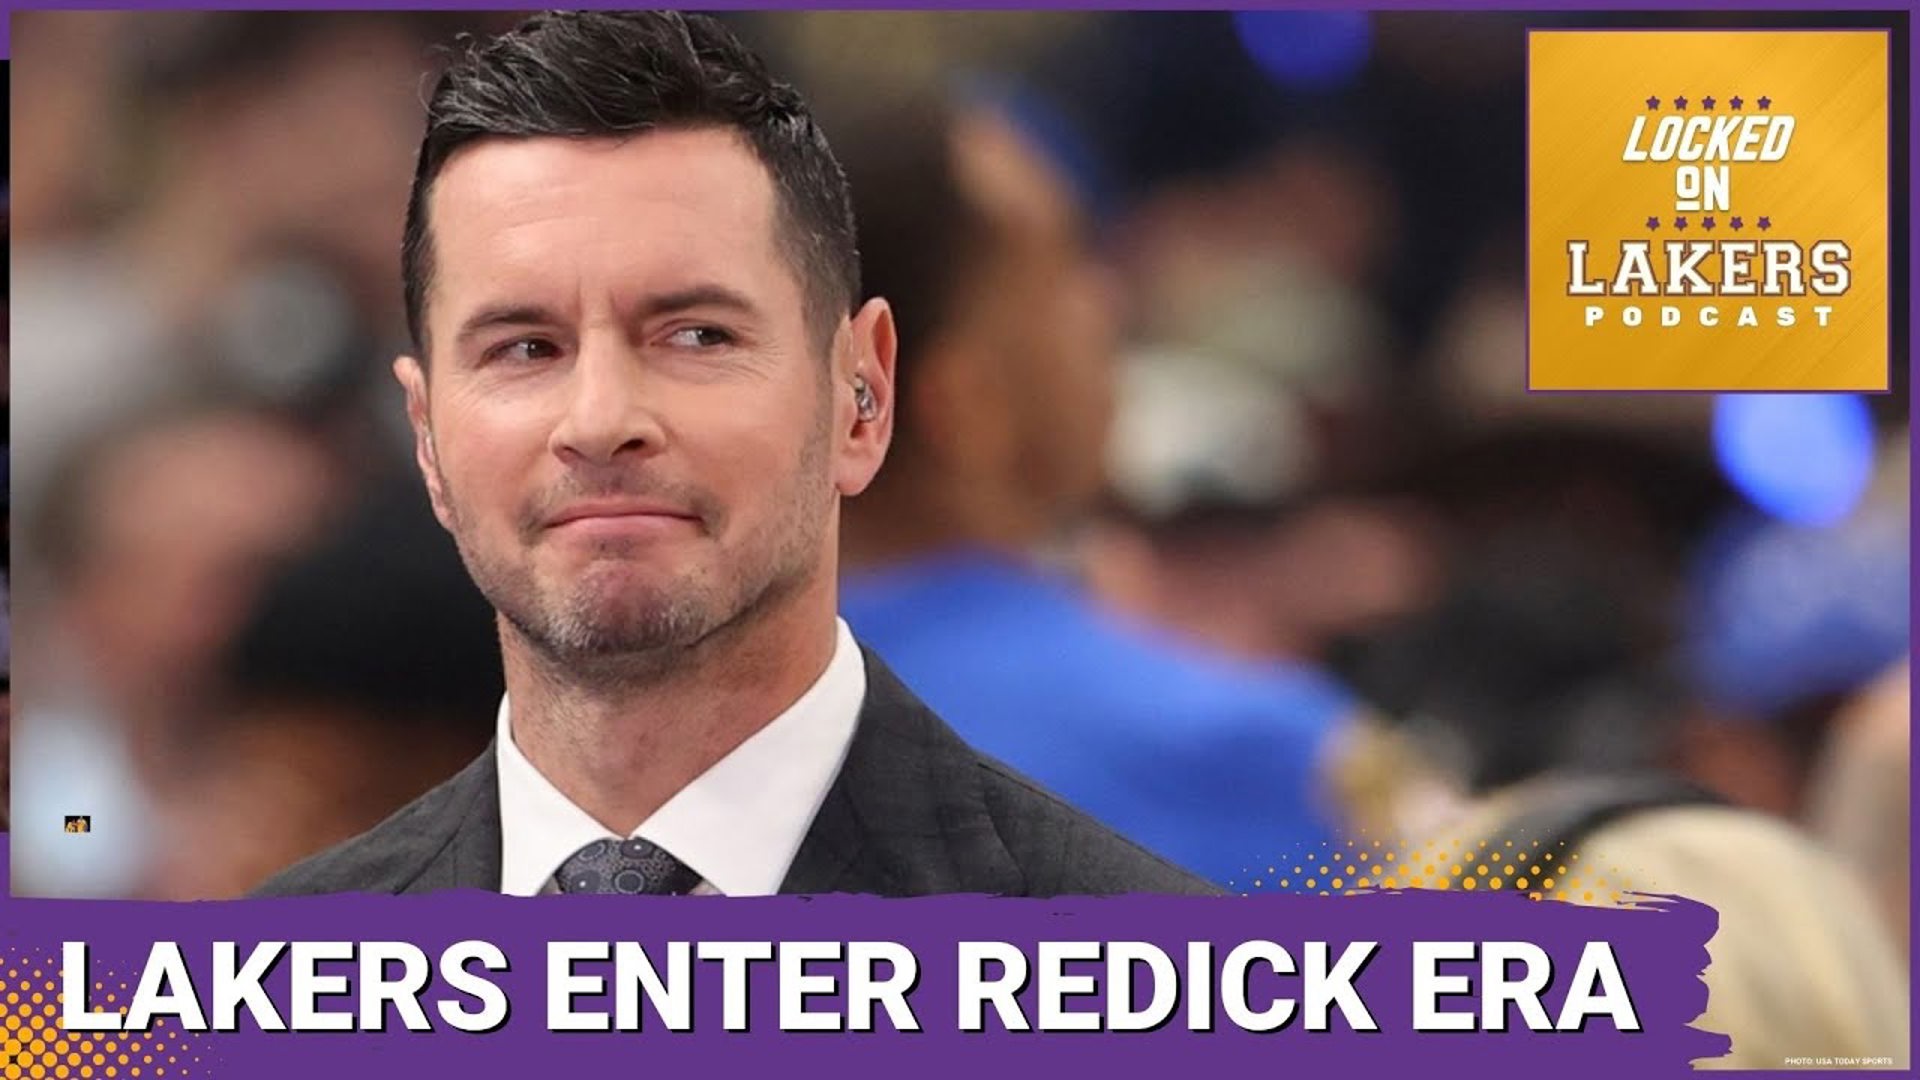 At long (like, loooooong) last, the Lakers have finally hired a coach. As widely anticipated, the new guy in town is JJ Redick.